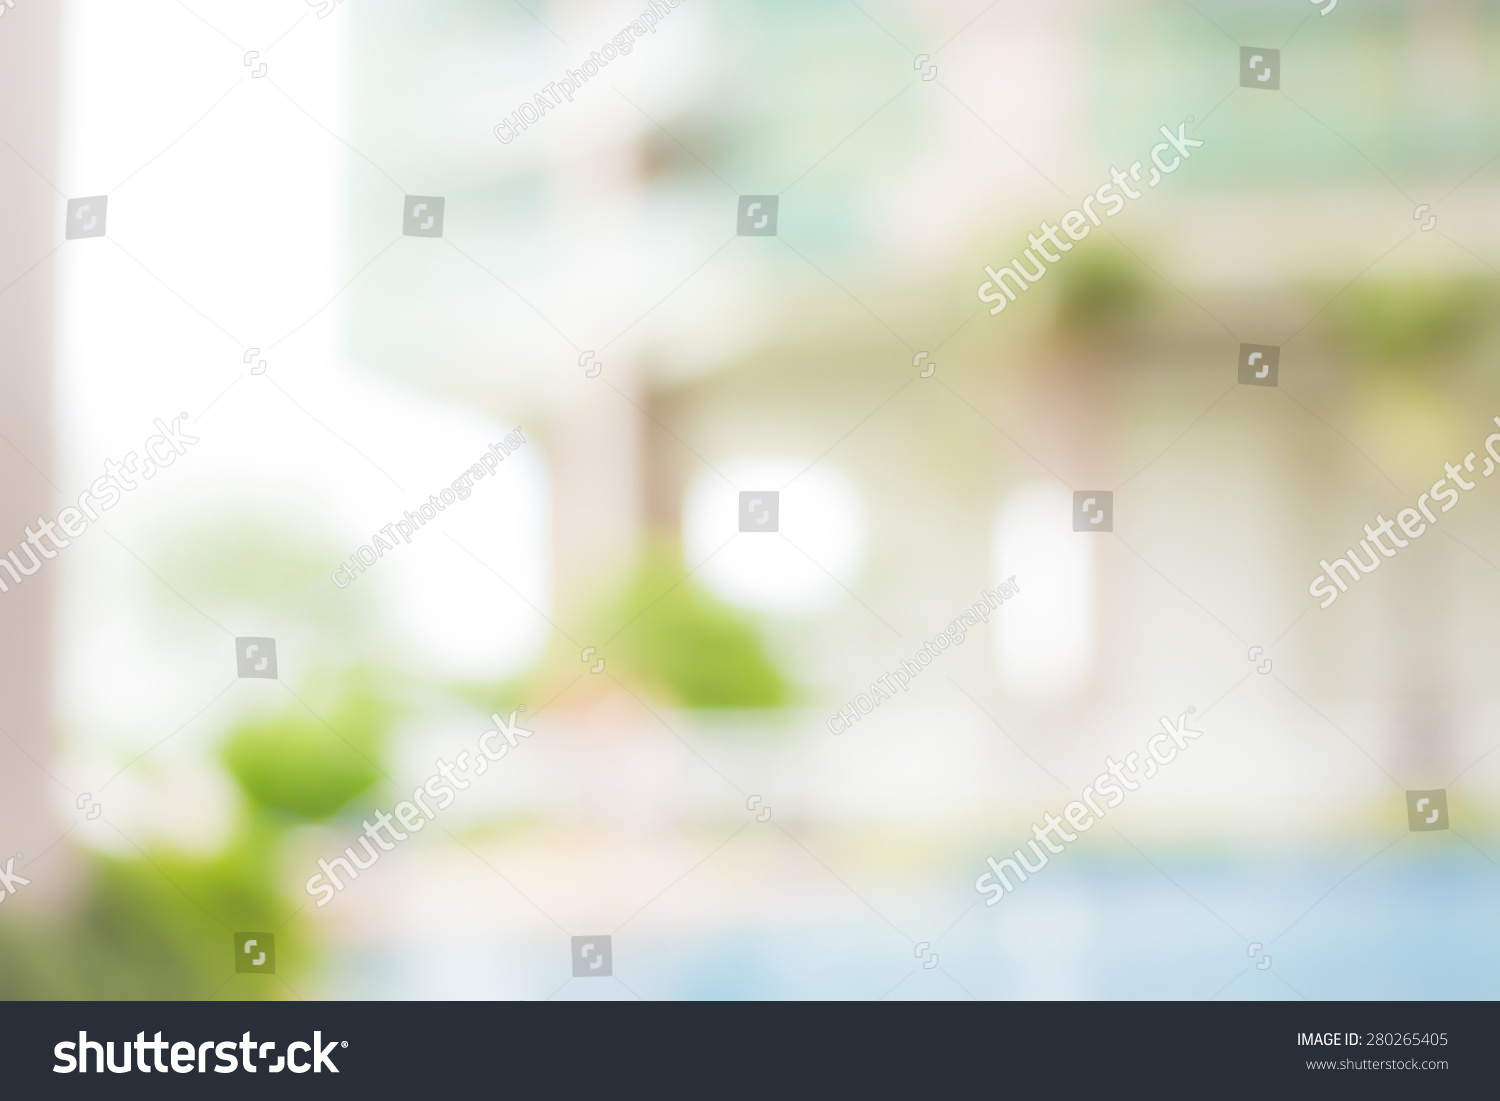 Healthy home concept: Blur outside house with green garden background #280265405